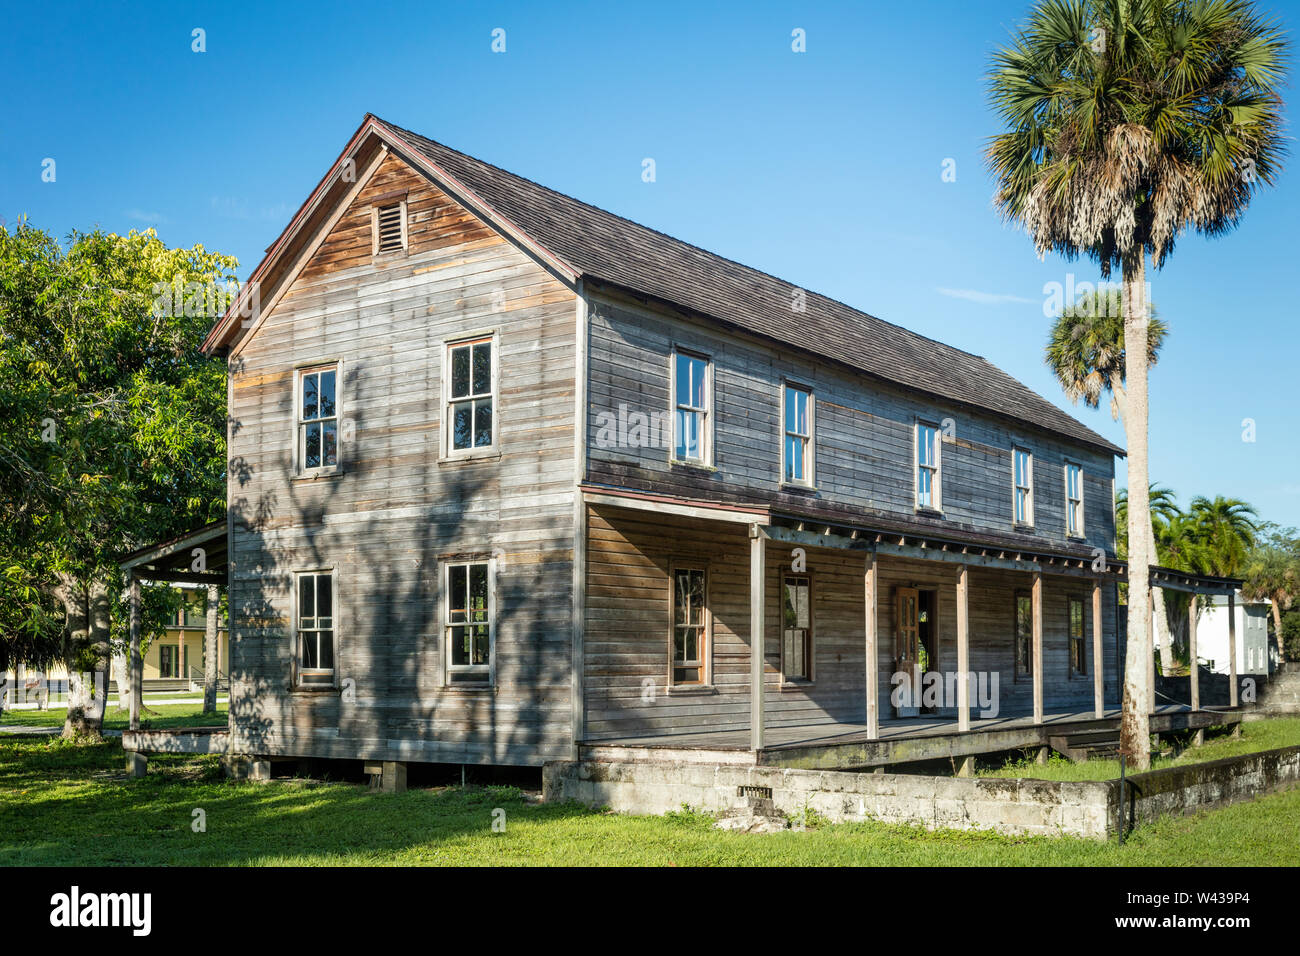 The Founders Home on the grounds of Koreshan Historic Settlement - a 19th Century Utopian Commune, Estero, Florida, USA Stock Photo